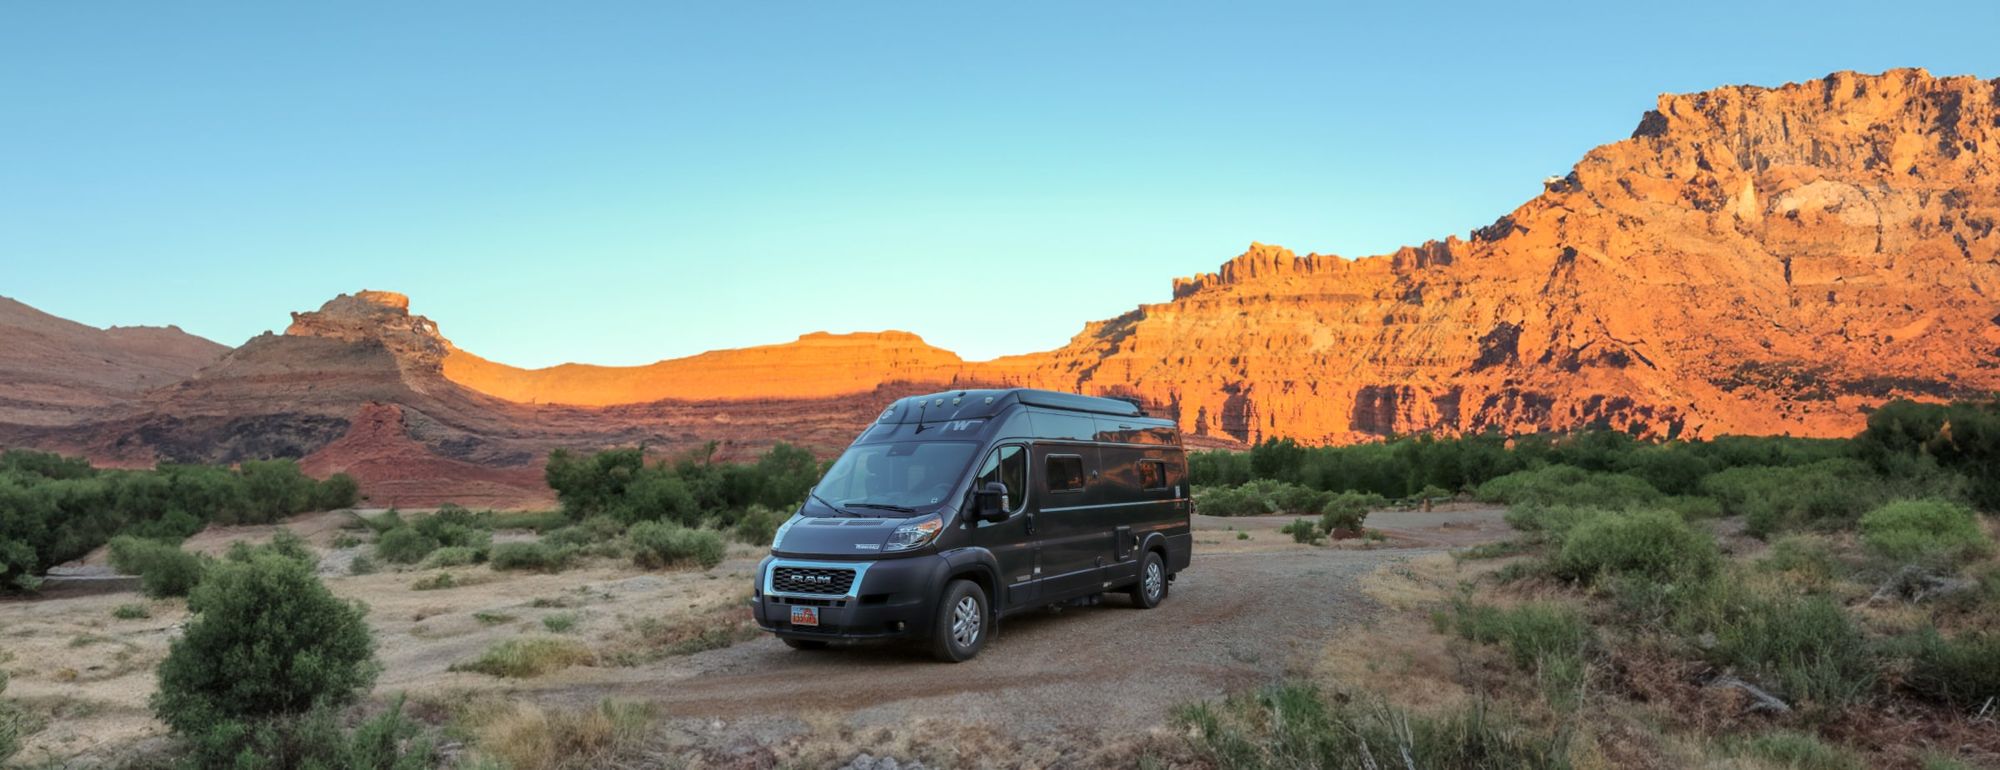 Hiring an RV in the US? Here's Everything You Need